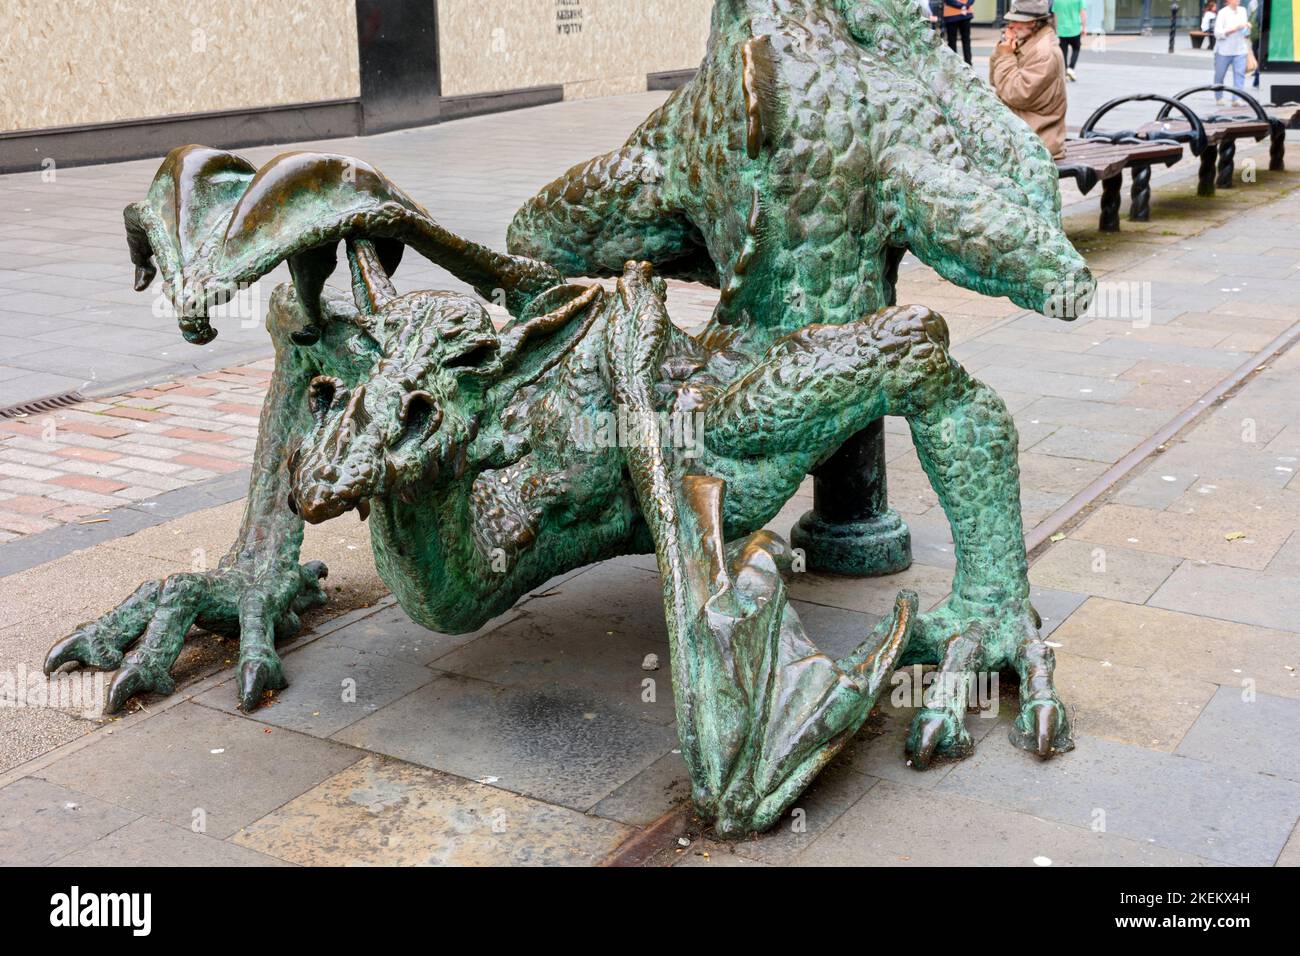 The Dragon, a sculpture by Alastair Smart and Tony Morrow.  Murrygate, Dundee, Scotland, UK Stock Photo